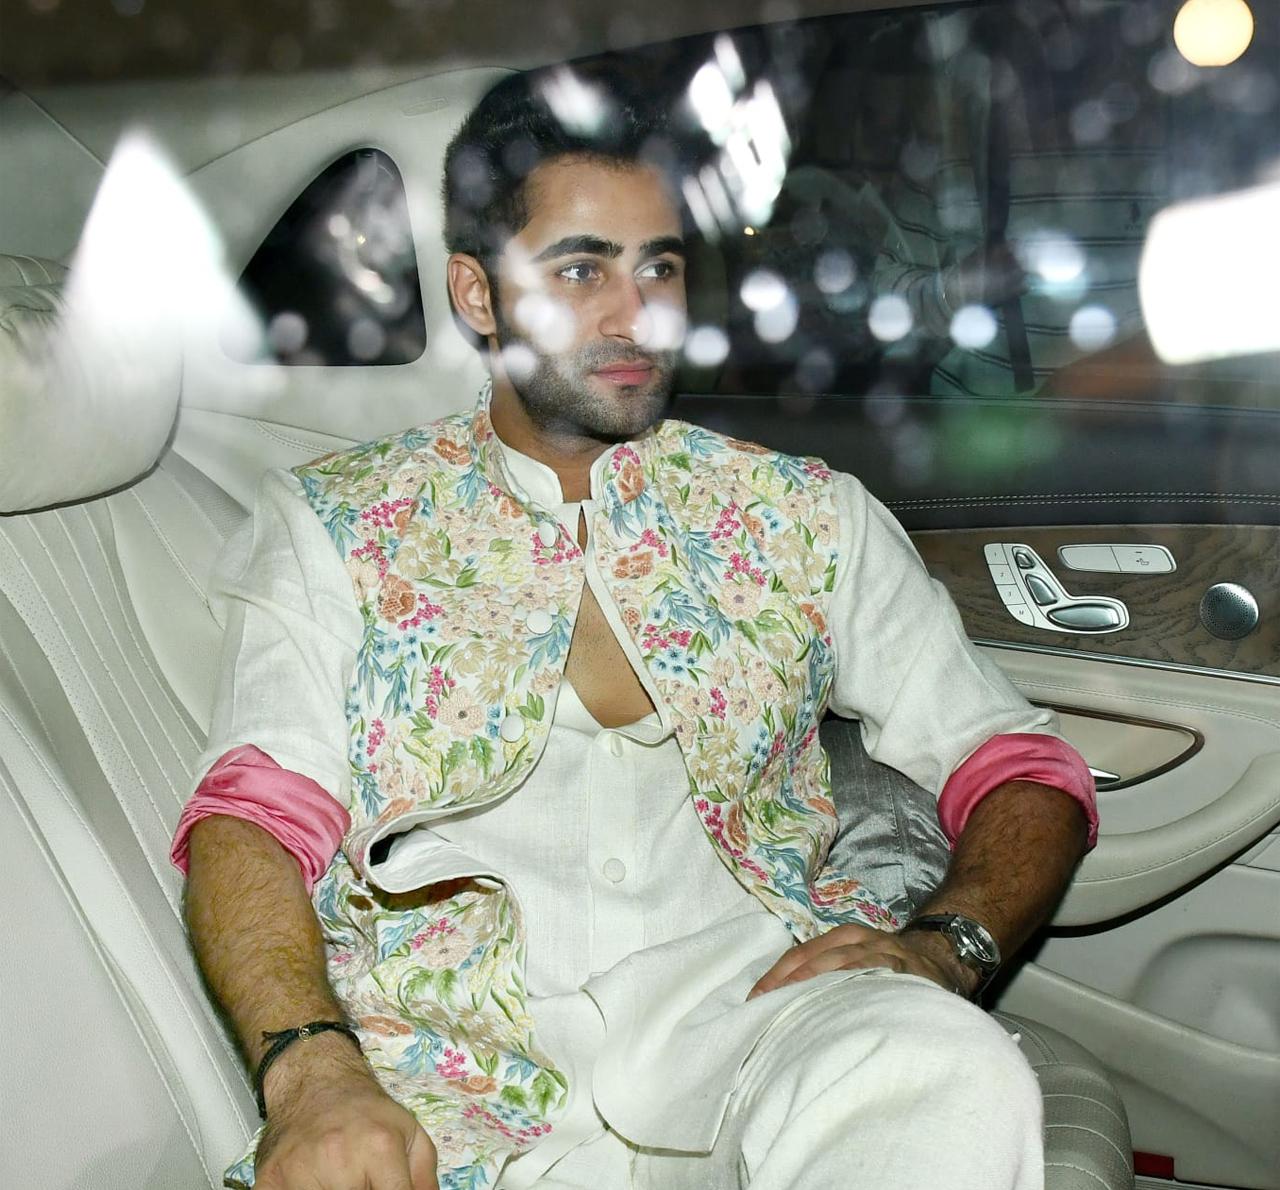 Another cousin of the Ranbir Kapoor, Aadar Jain, was clicked in a rather amusing way. He could be seen taking rest on his car seat at the back as the media clicked him in a kurta pajama.